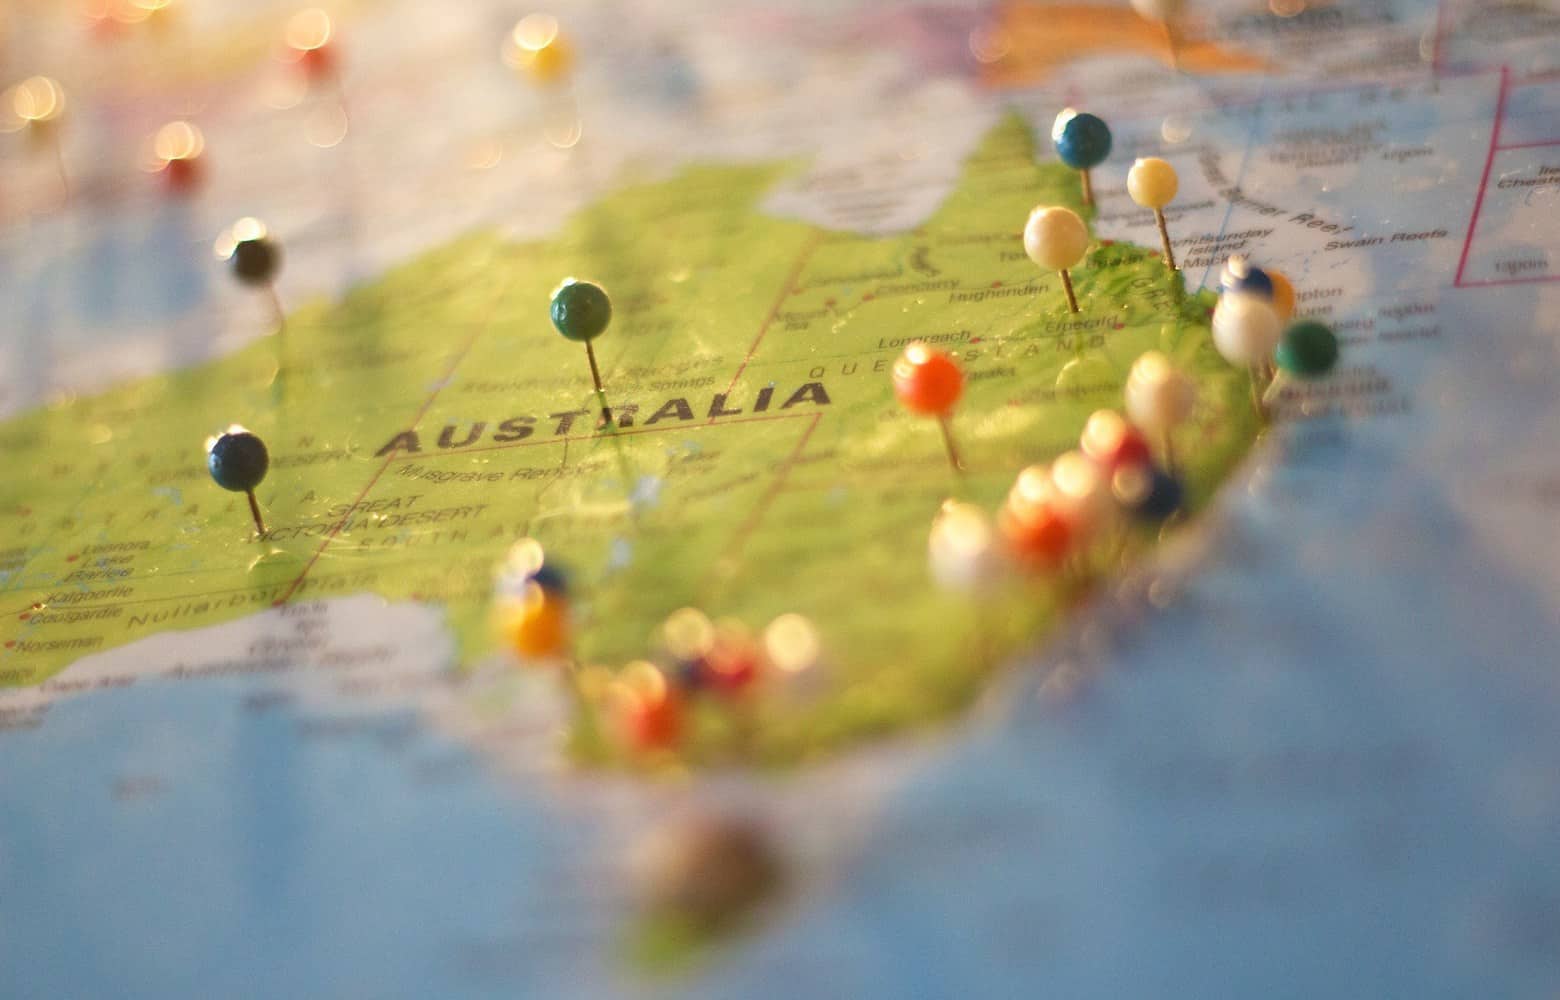 Part of a world map showing Australia with pins.